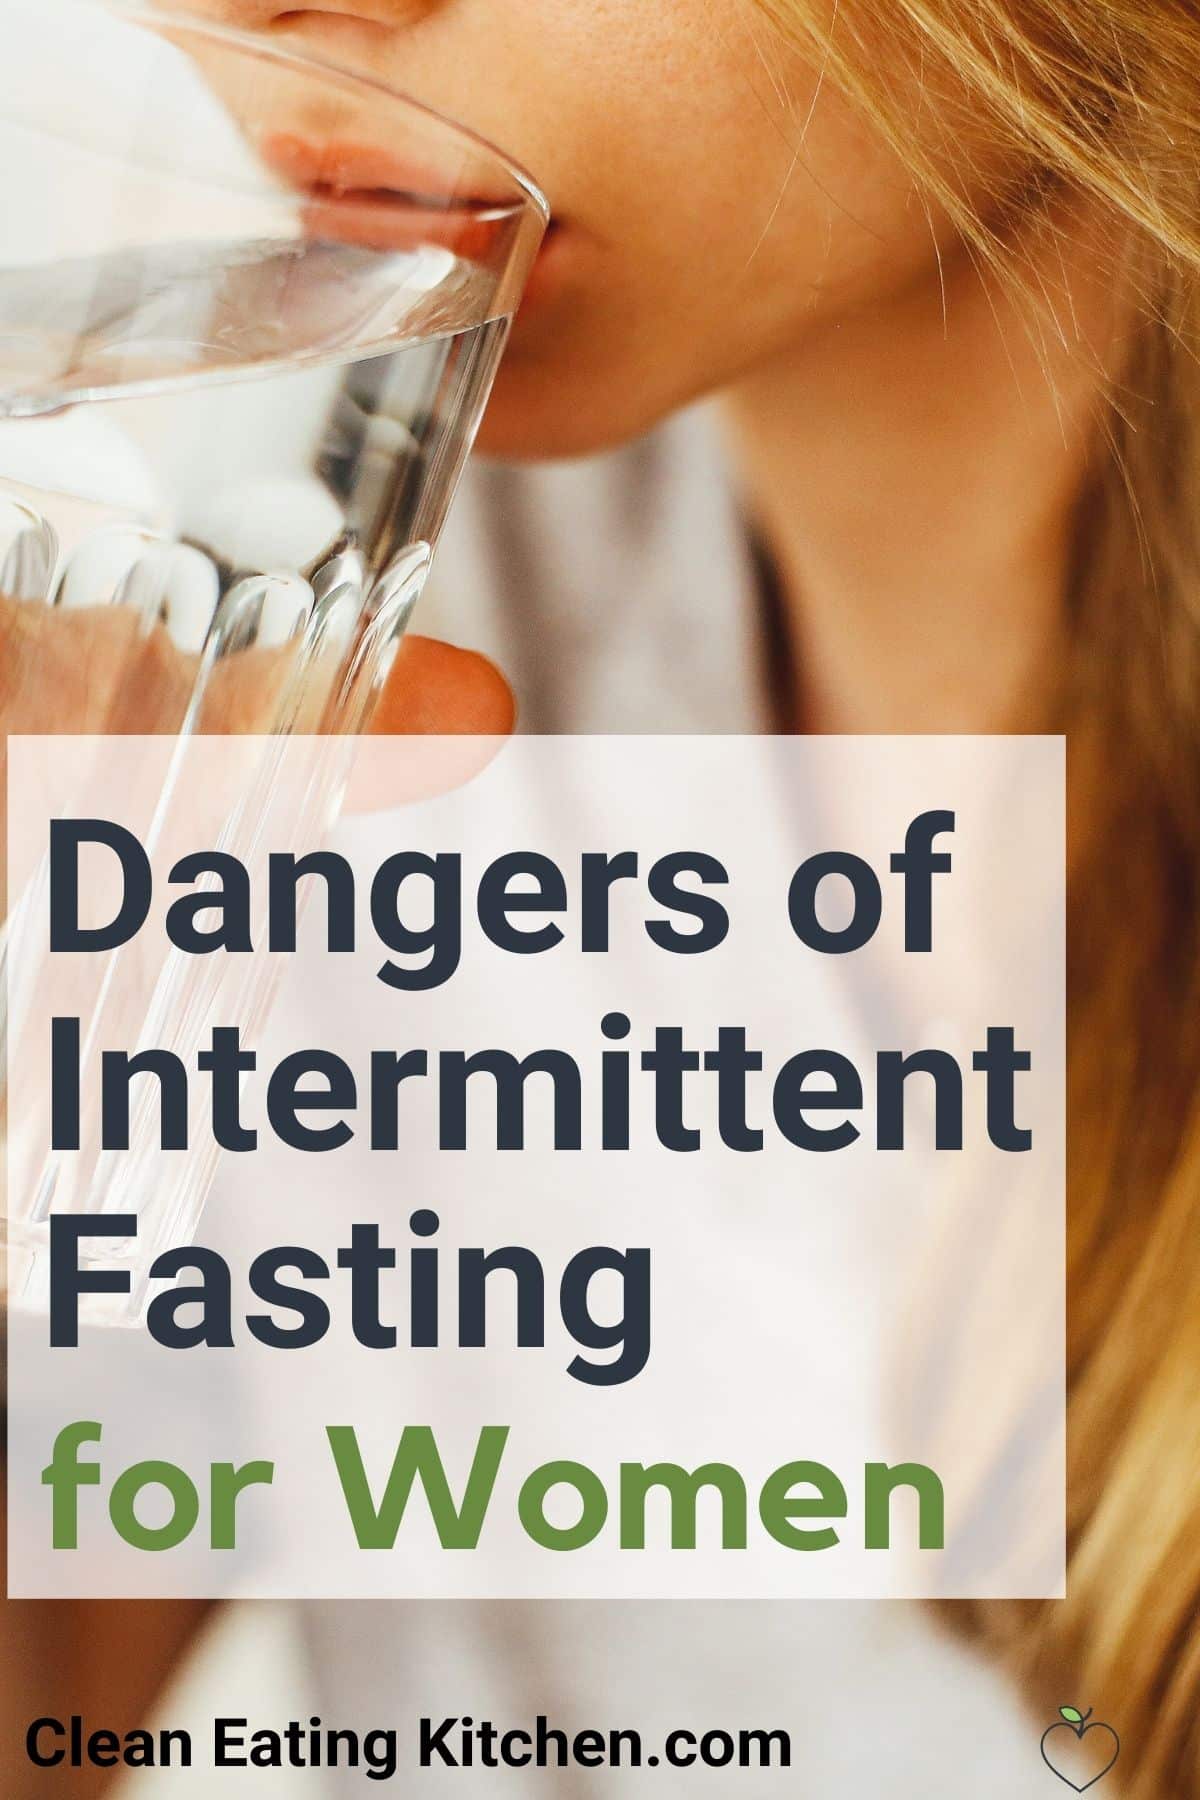 dangers of fasting for women infographic.